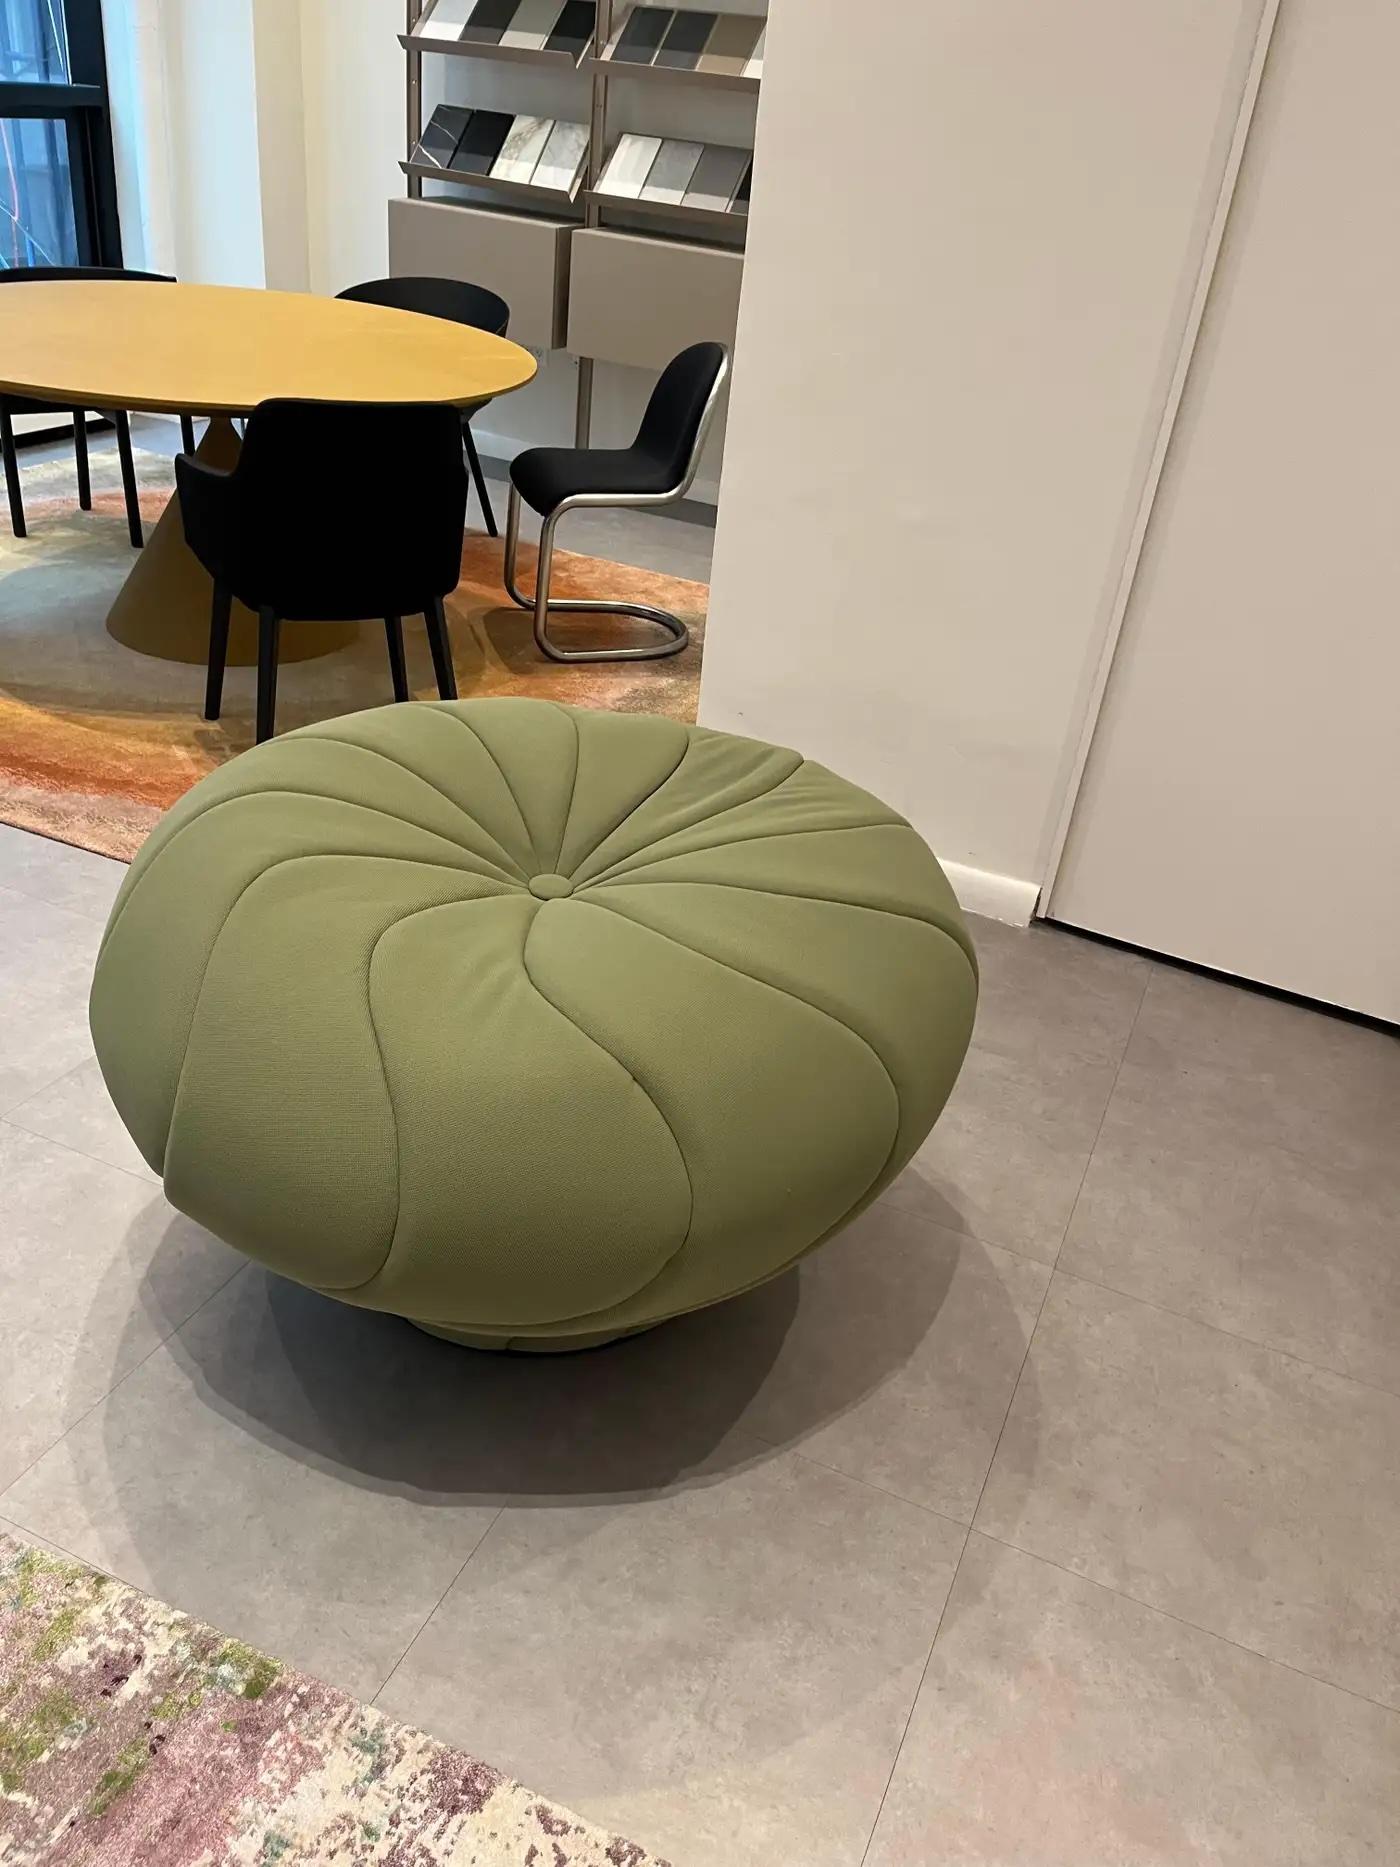 Drawing inspiration from the surprising and unique shape of mushrooms, Front imagined a strikingly singular pouf design that sprouts from the ground. Made in Italy.

Pouf (only with elastic fabric)
GABRIEL CONTOUR Color 68239
Size: W974 x D974 x